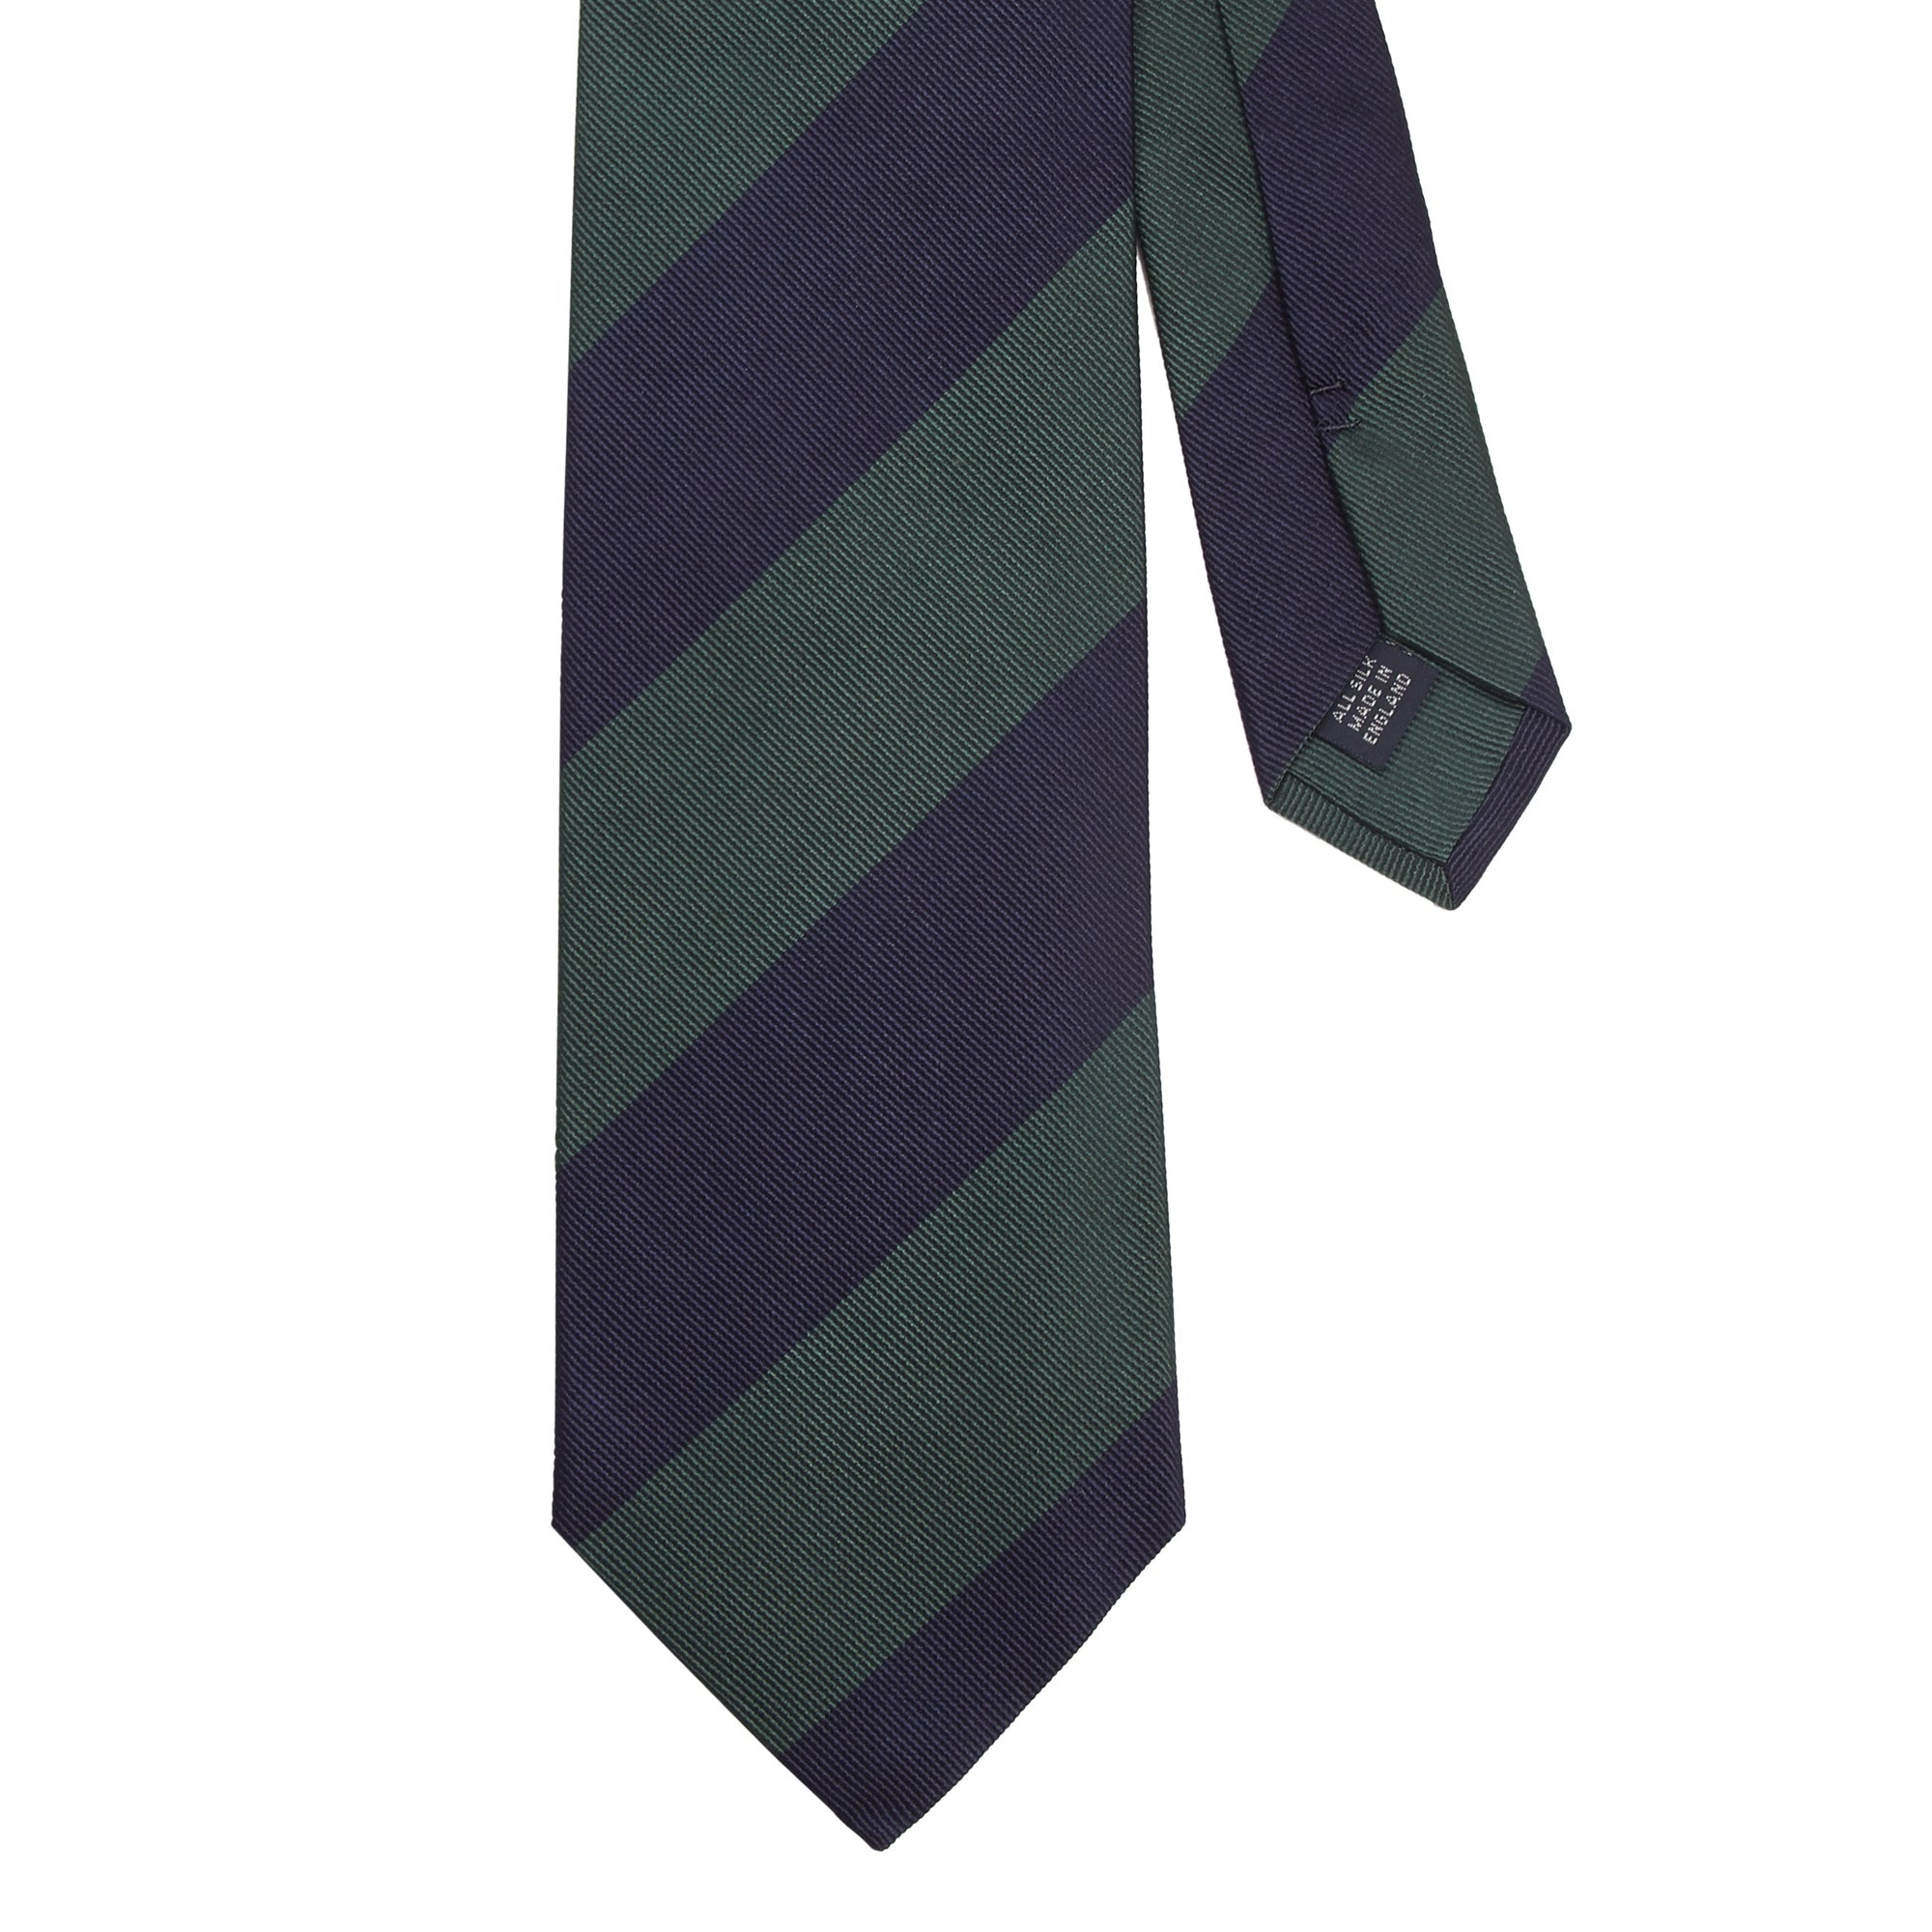 A KirbyAllison.com Sovereign Grade Midnight/Forest Household Guards (Royal Artillery) Tie in green and navy stripes on a white background.